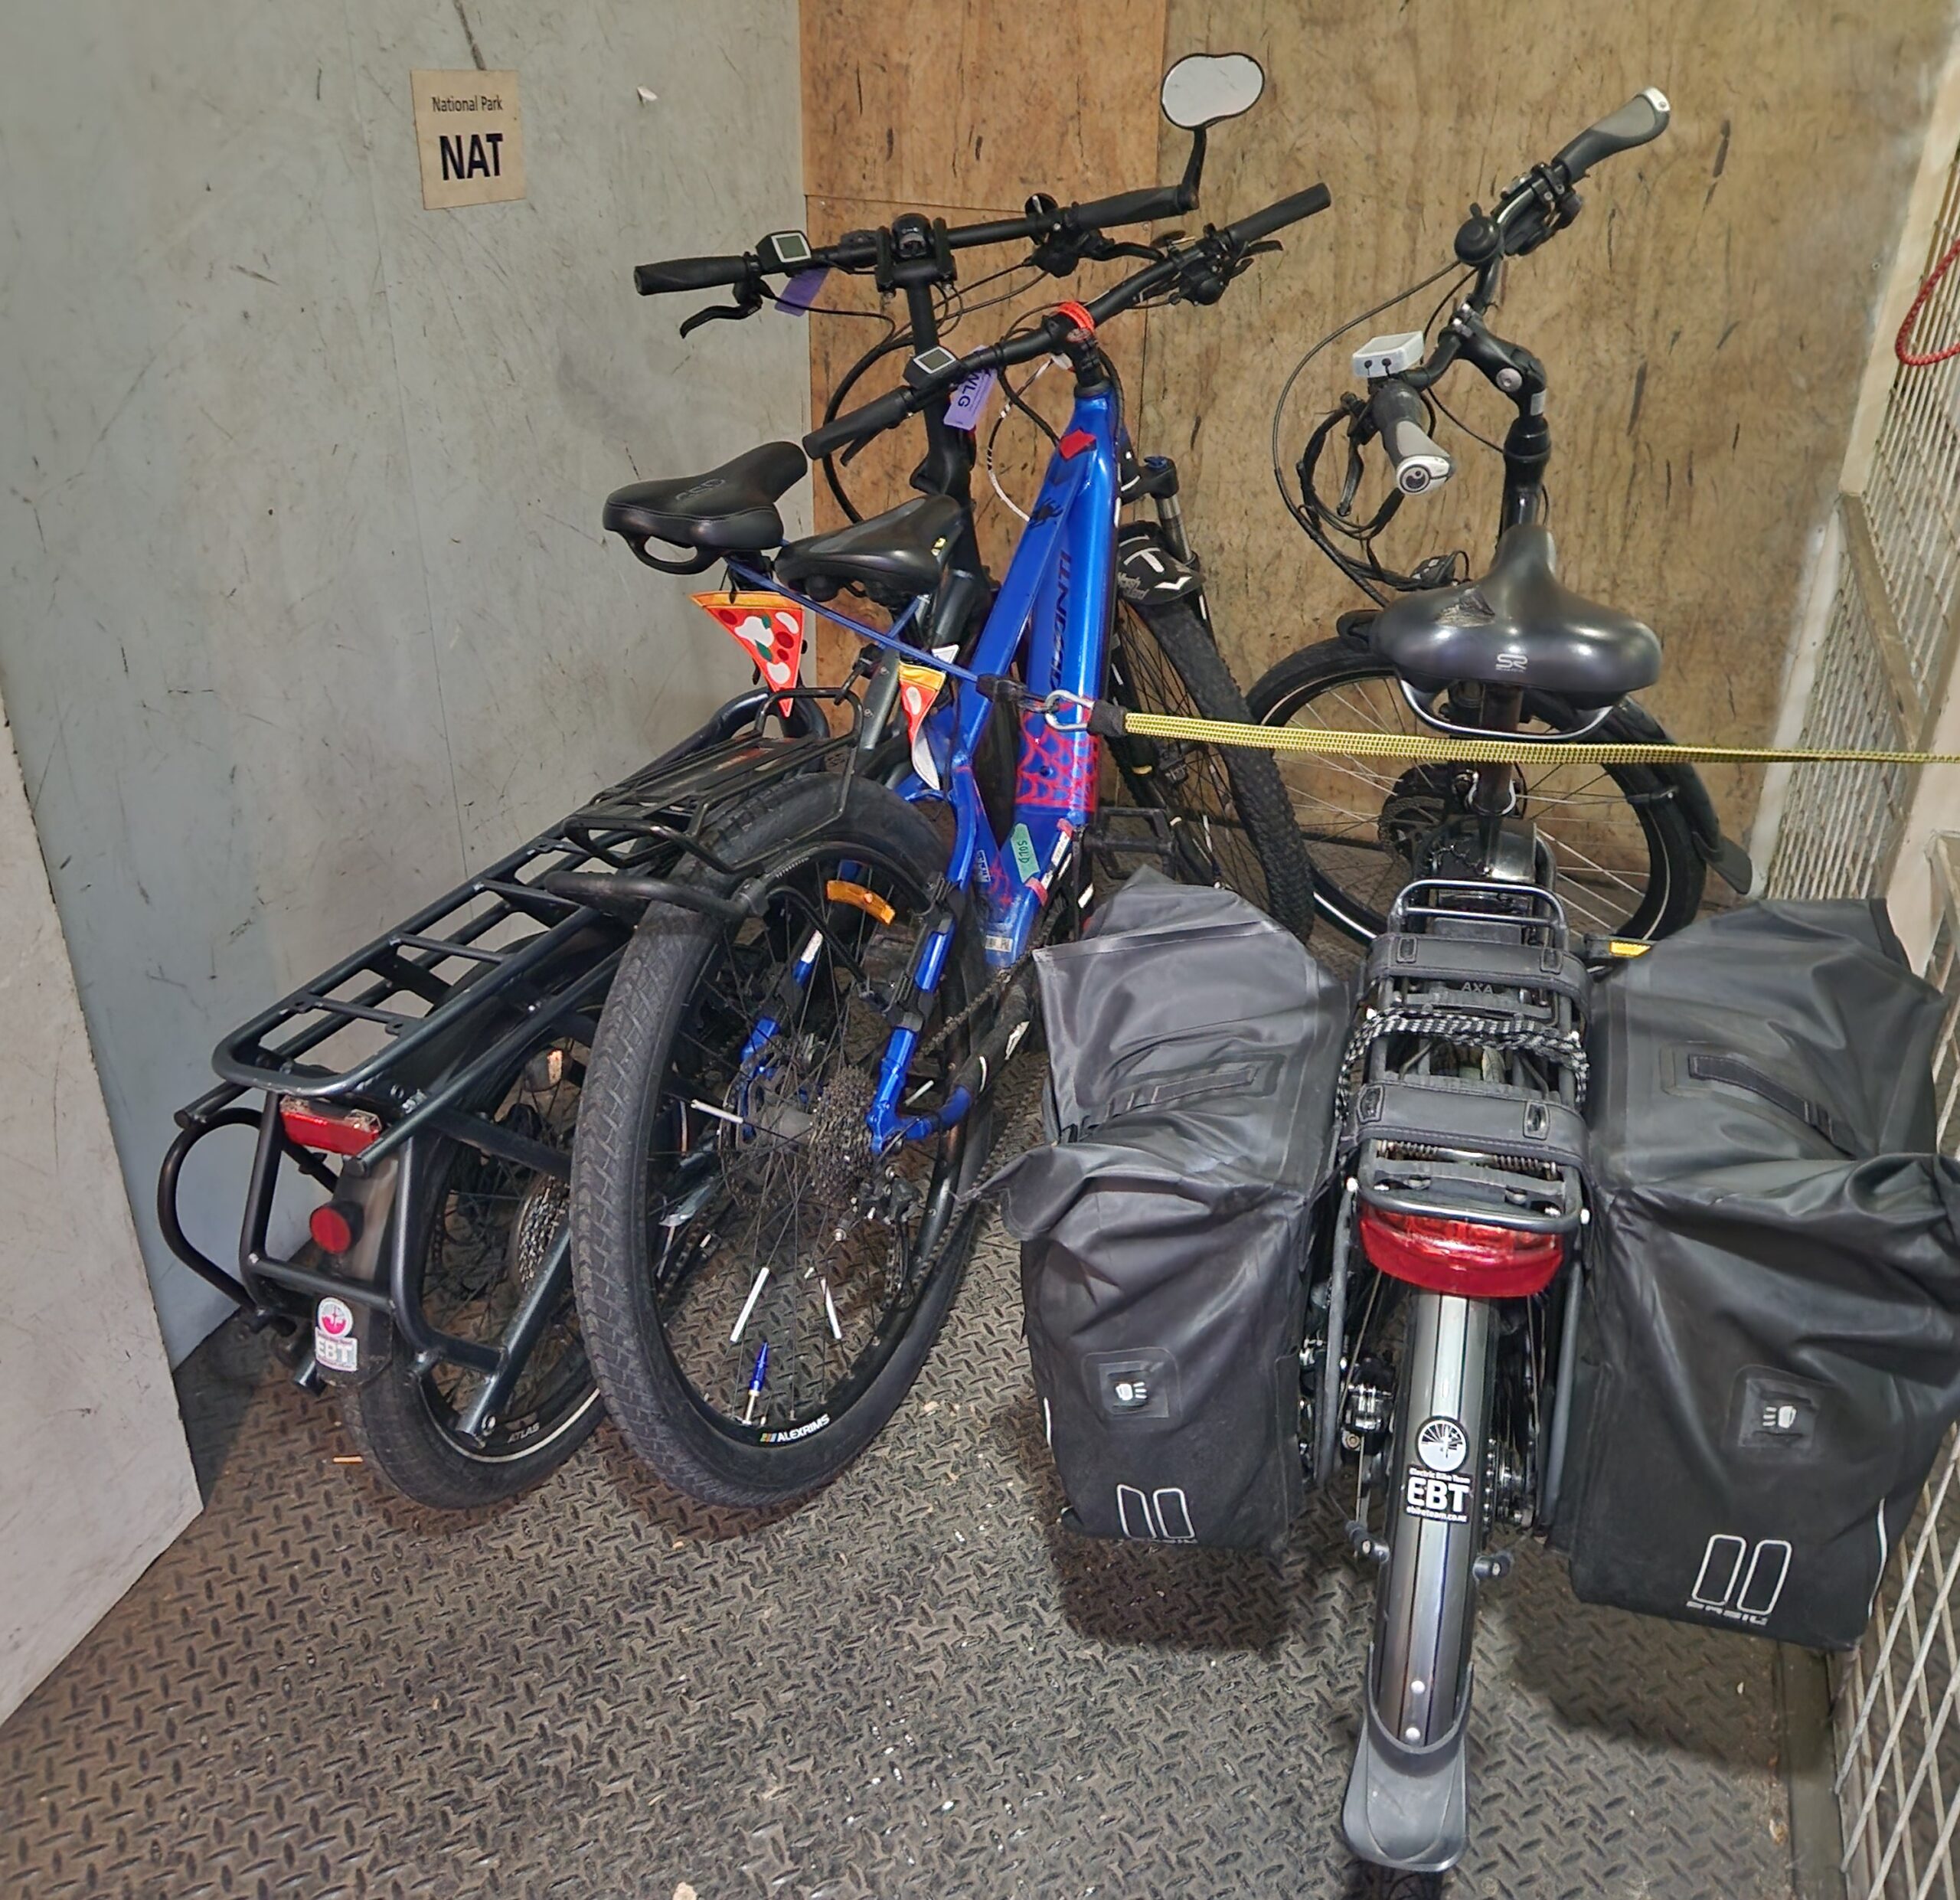 Three bikes strapped in to a small compartment